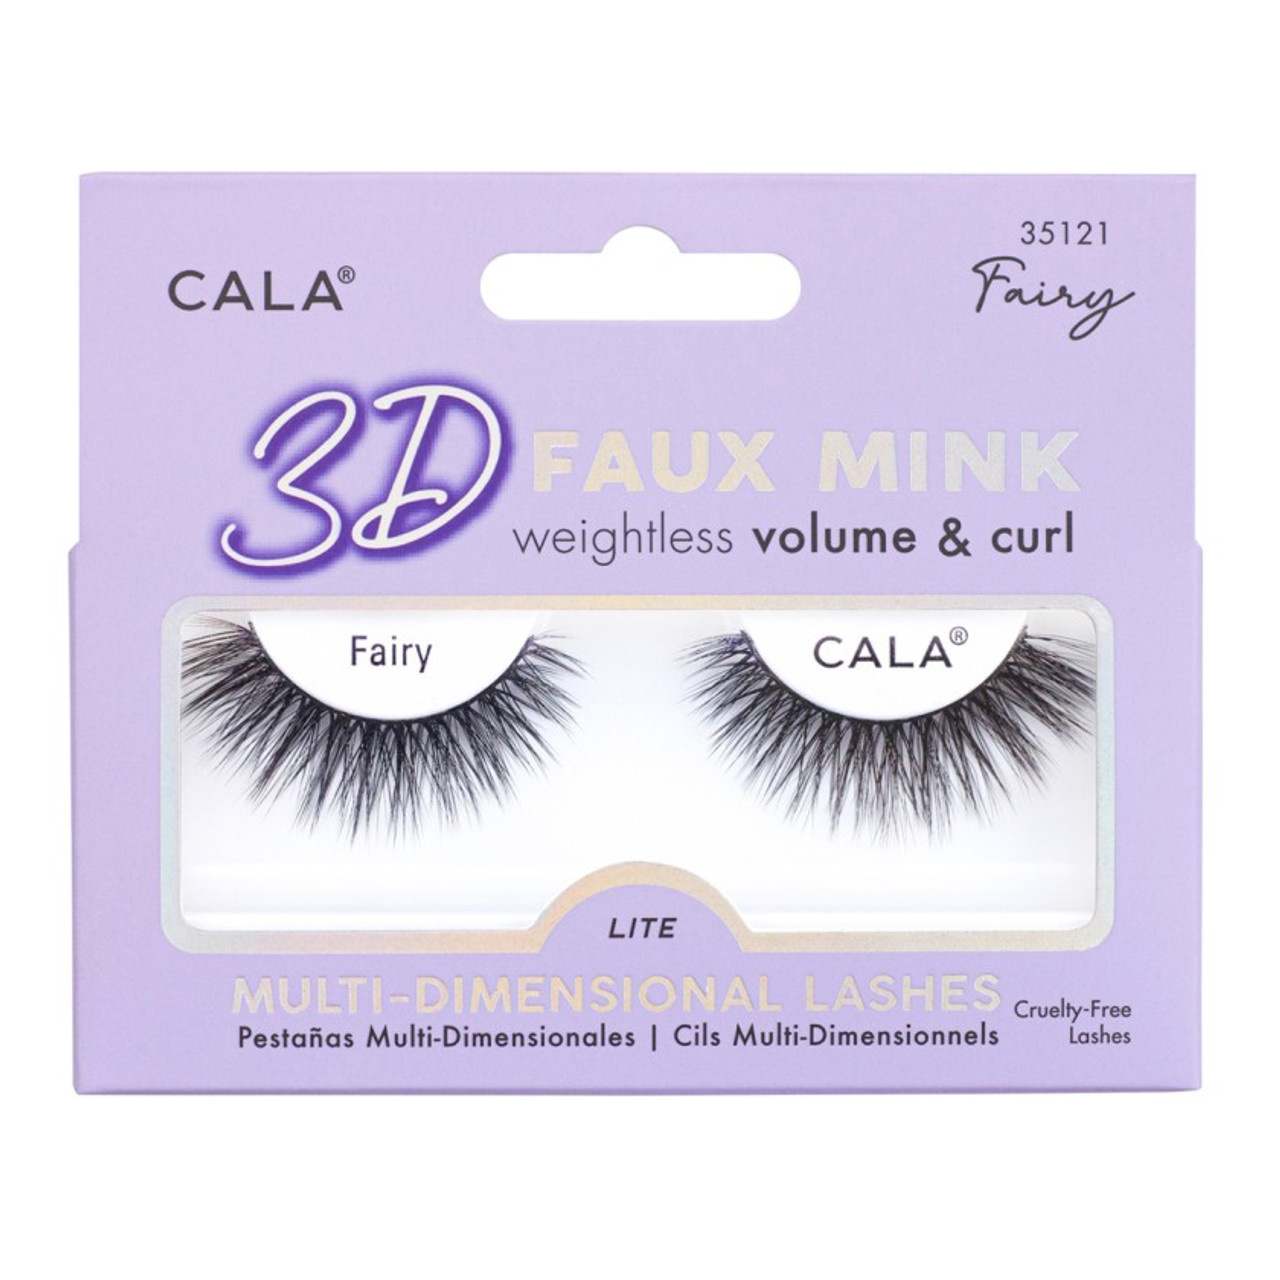 Shop Faux Mink Lashes at CALA Products!